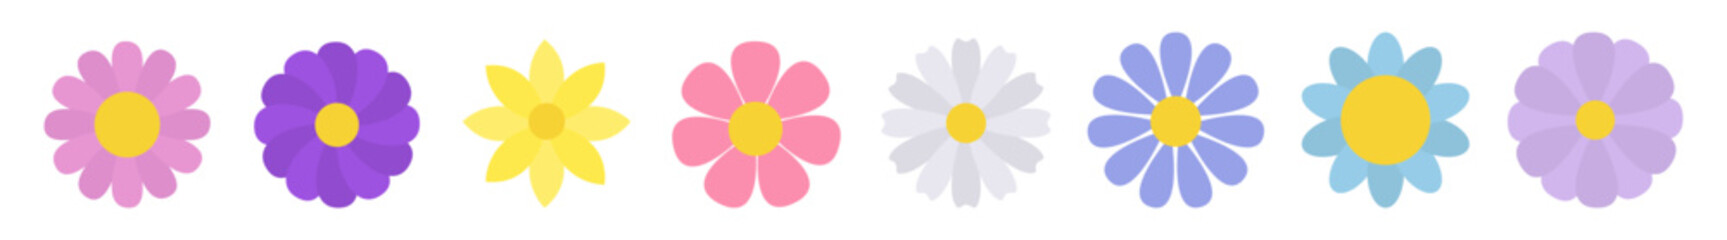 Spring flower set line. . Daisy chamomile, daffodil, sun flower, chrysanthemum. Colorful flowers collection. Growing concept. Fresh and blooming elements. Flat design. Isolated White background Vector